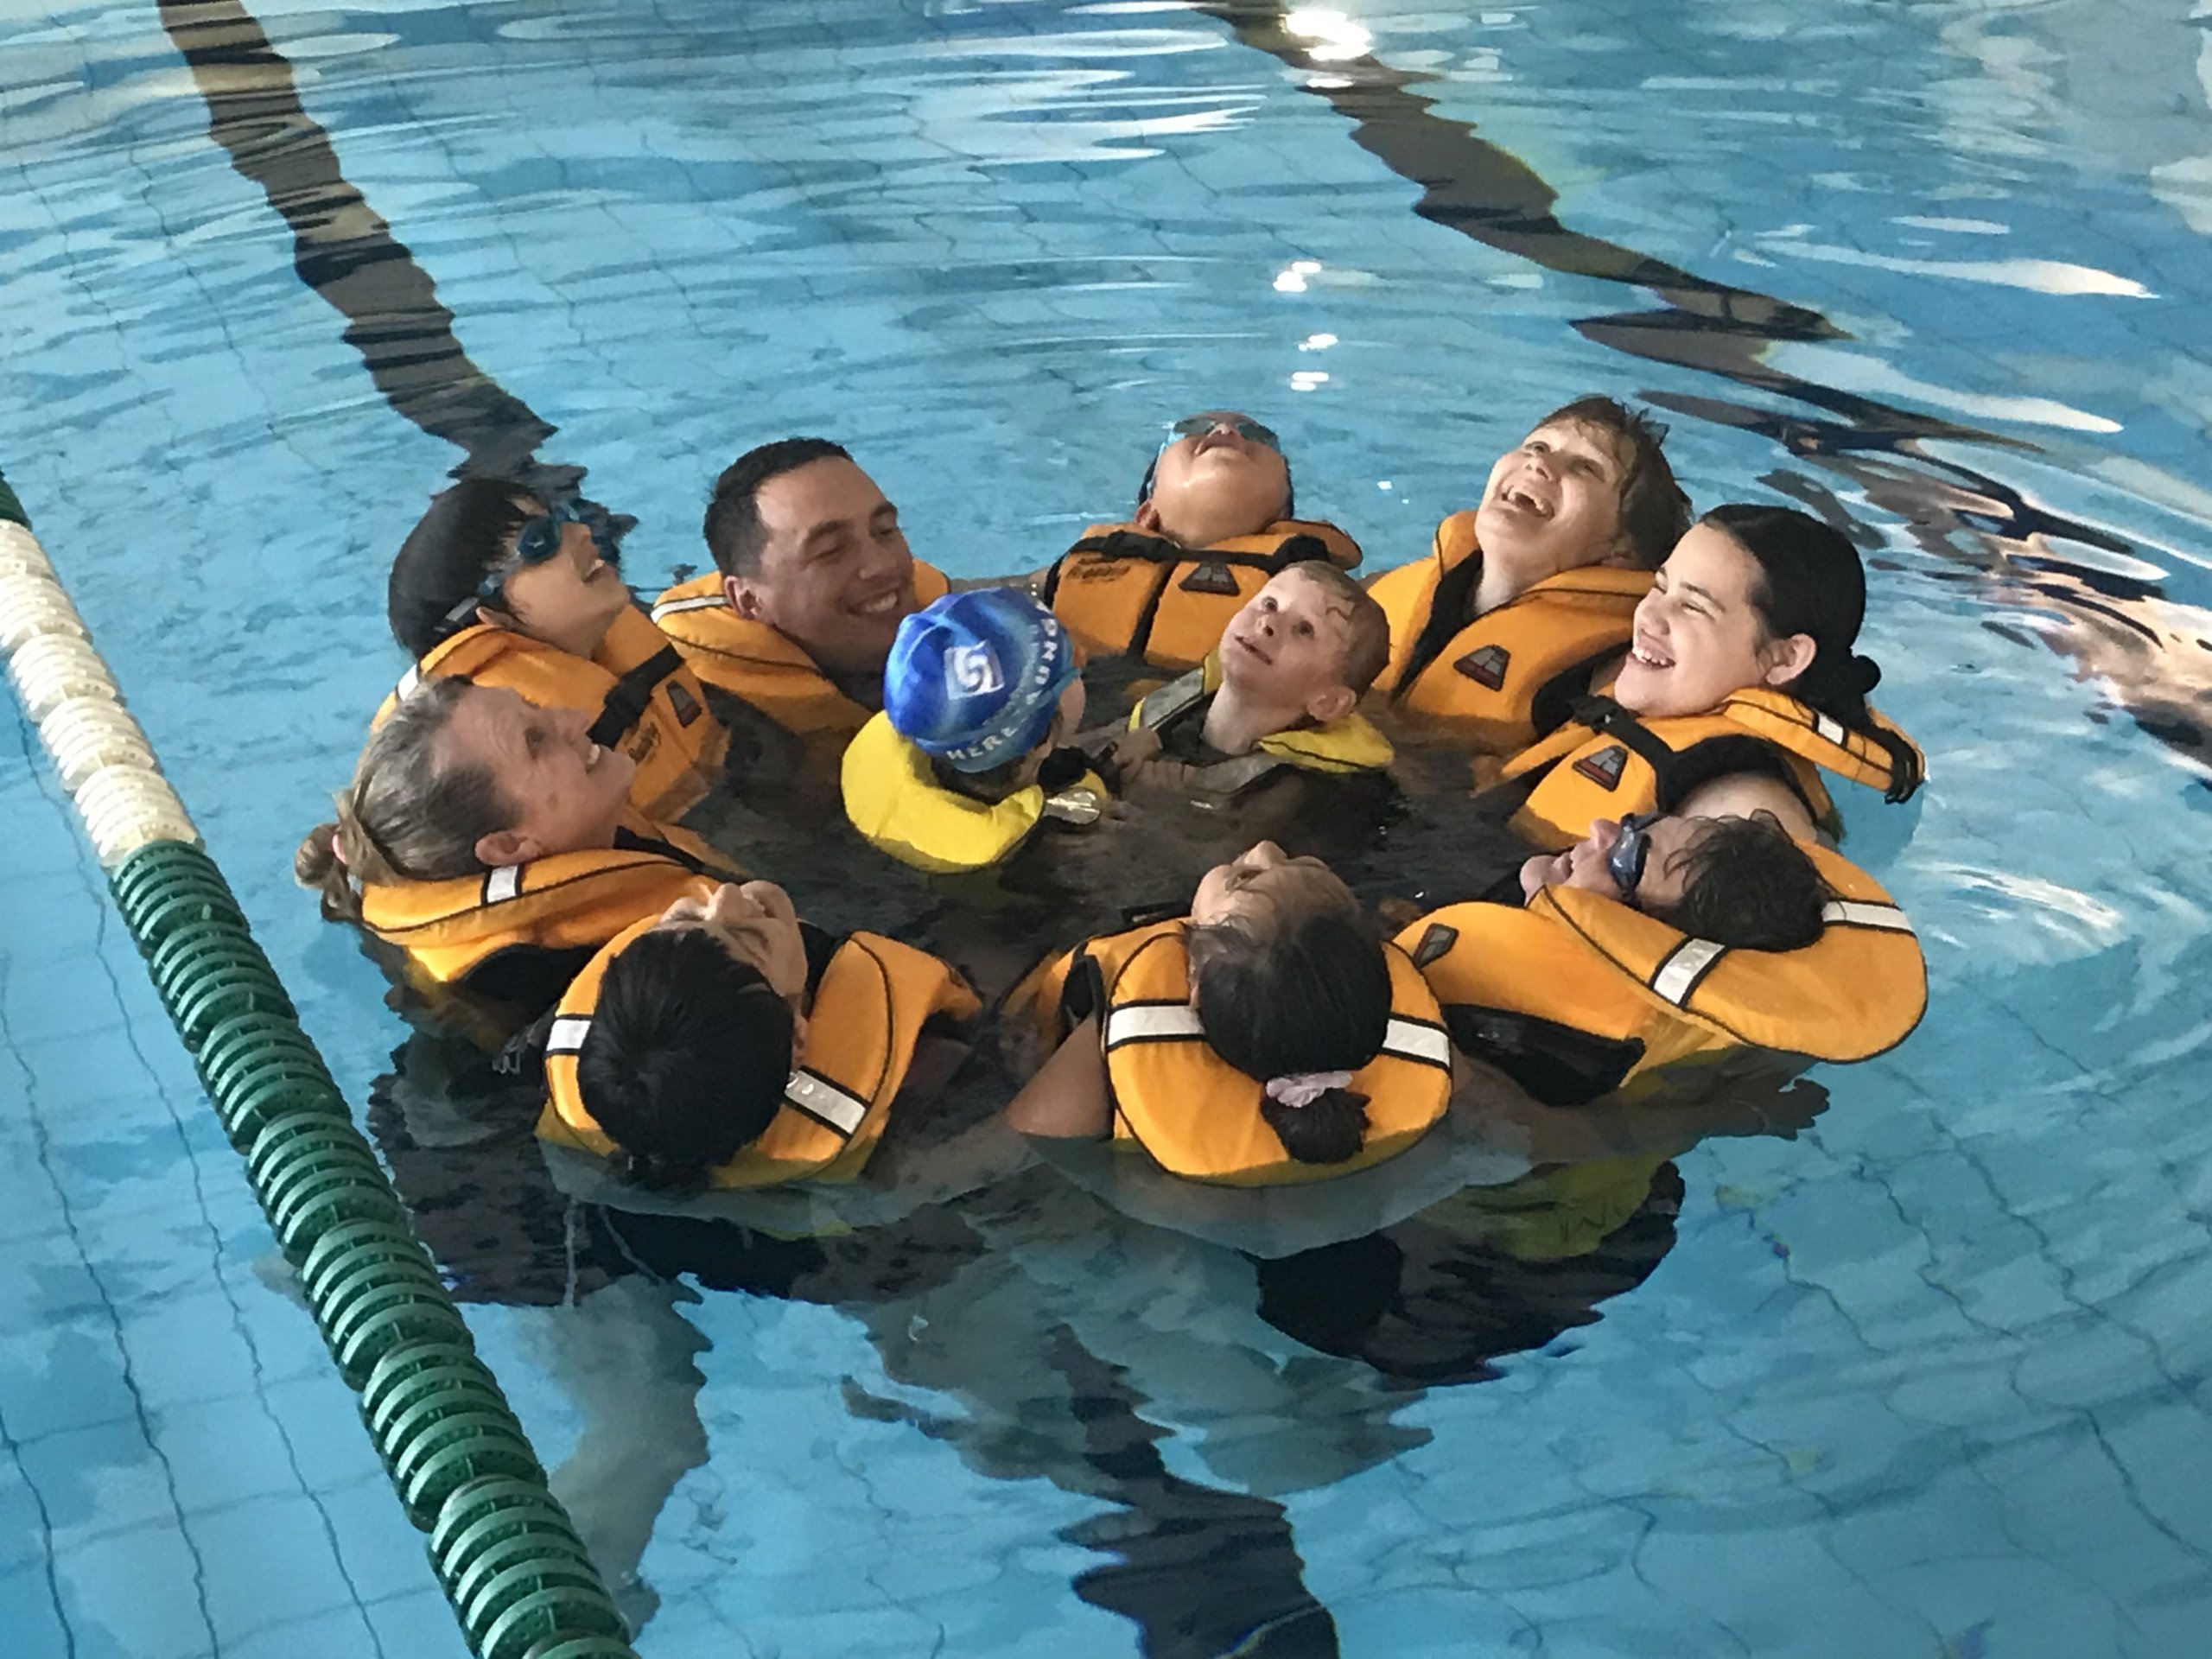 8 Ākonga and their instructors are all wearing lifejackets and are joined together huddled in a circle in the swimming pool